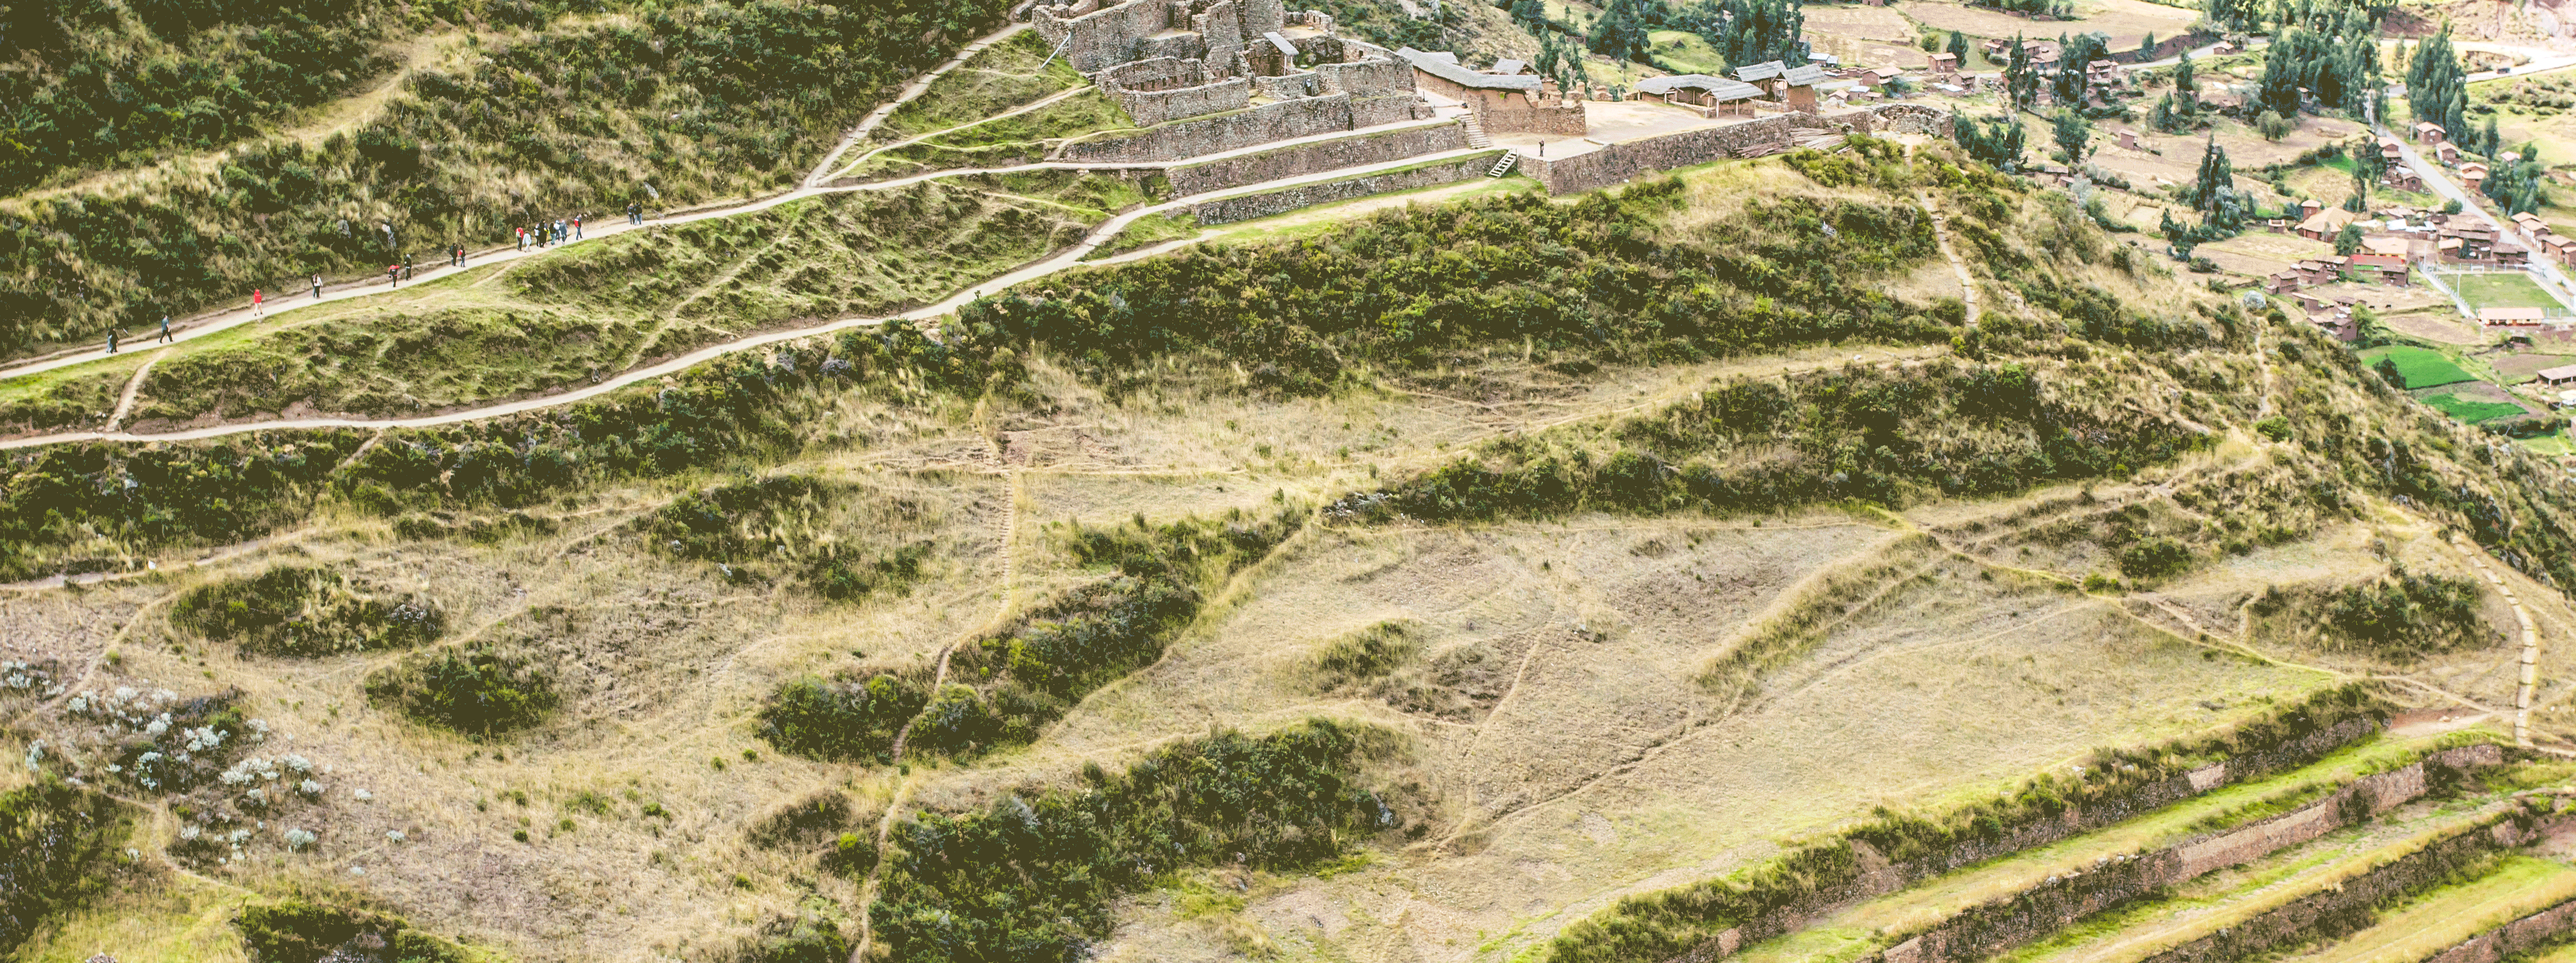 /resource/Images/southamerica/peru/headerimage/Peru,-Pisac-(Pisaq)---Inca-ruins-in-the-sacred-valley-in-the-Peruvian-Andes_HiRes.png